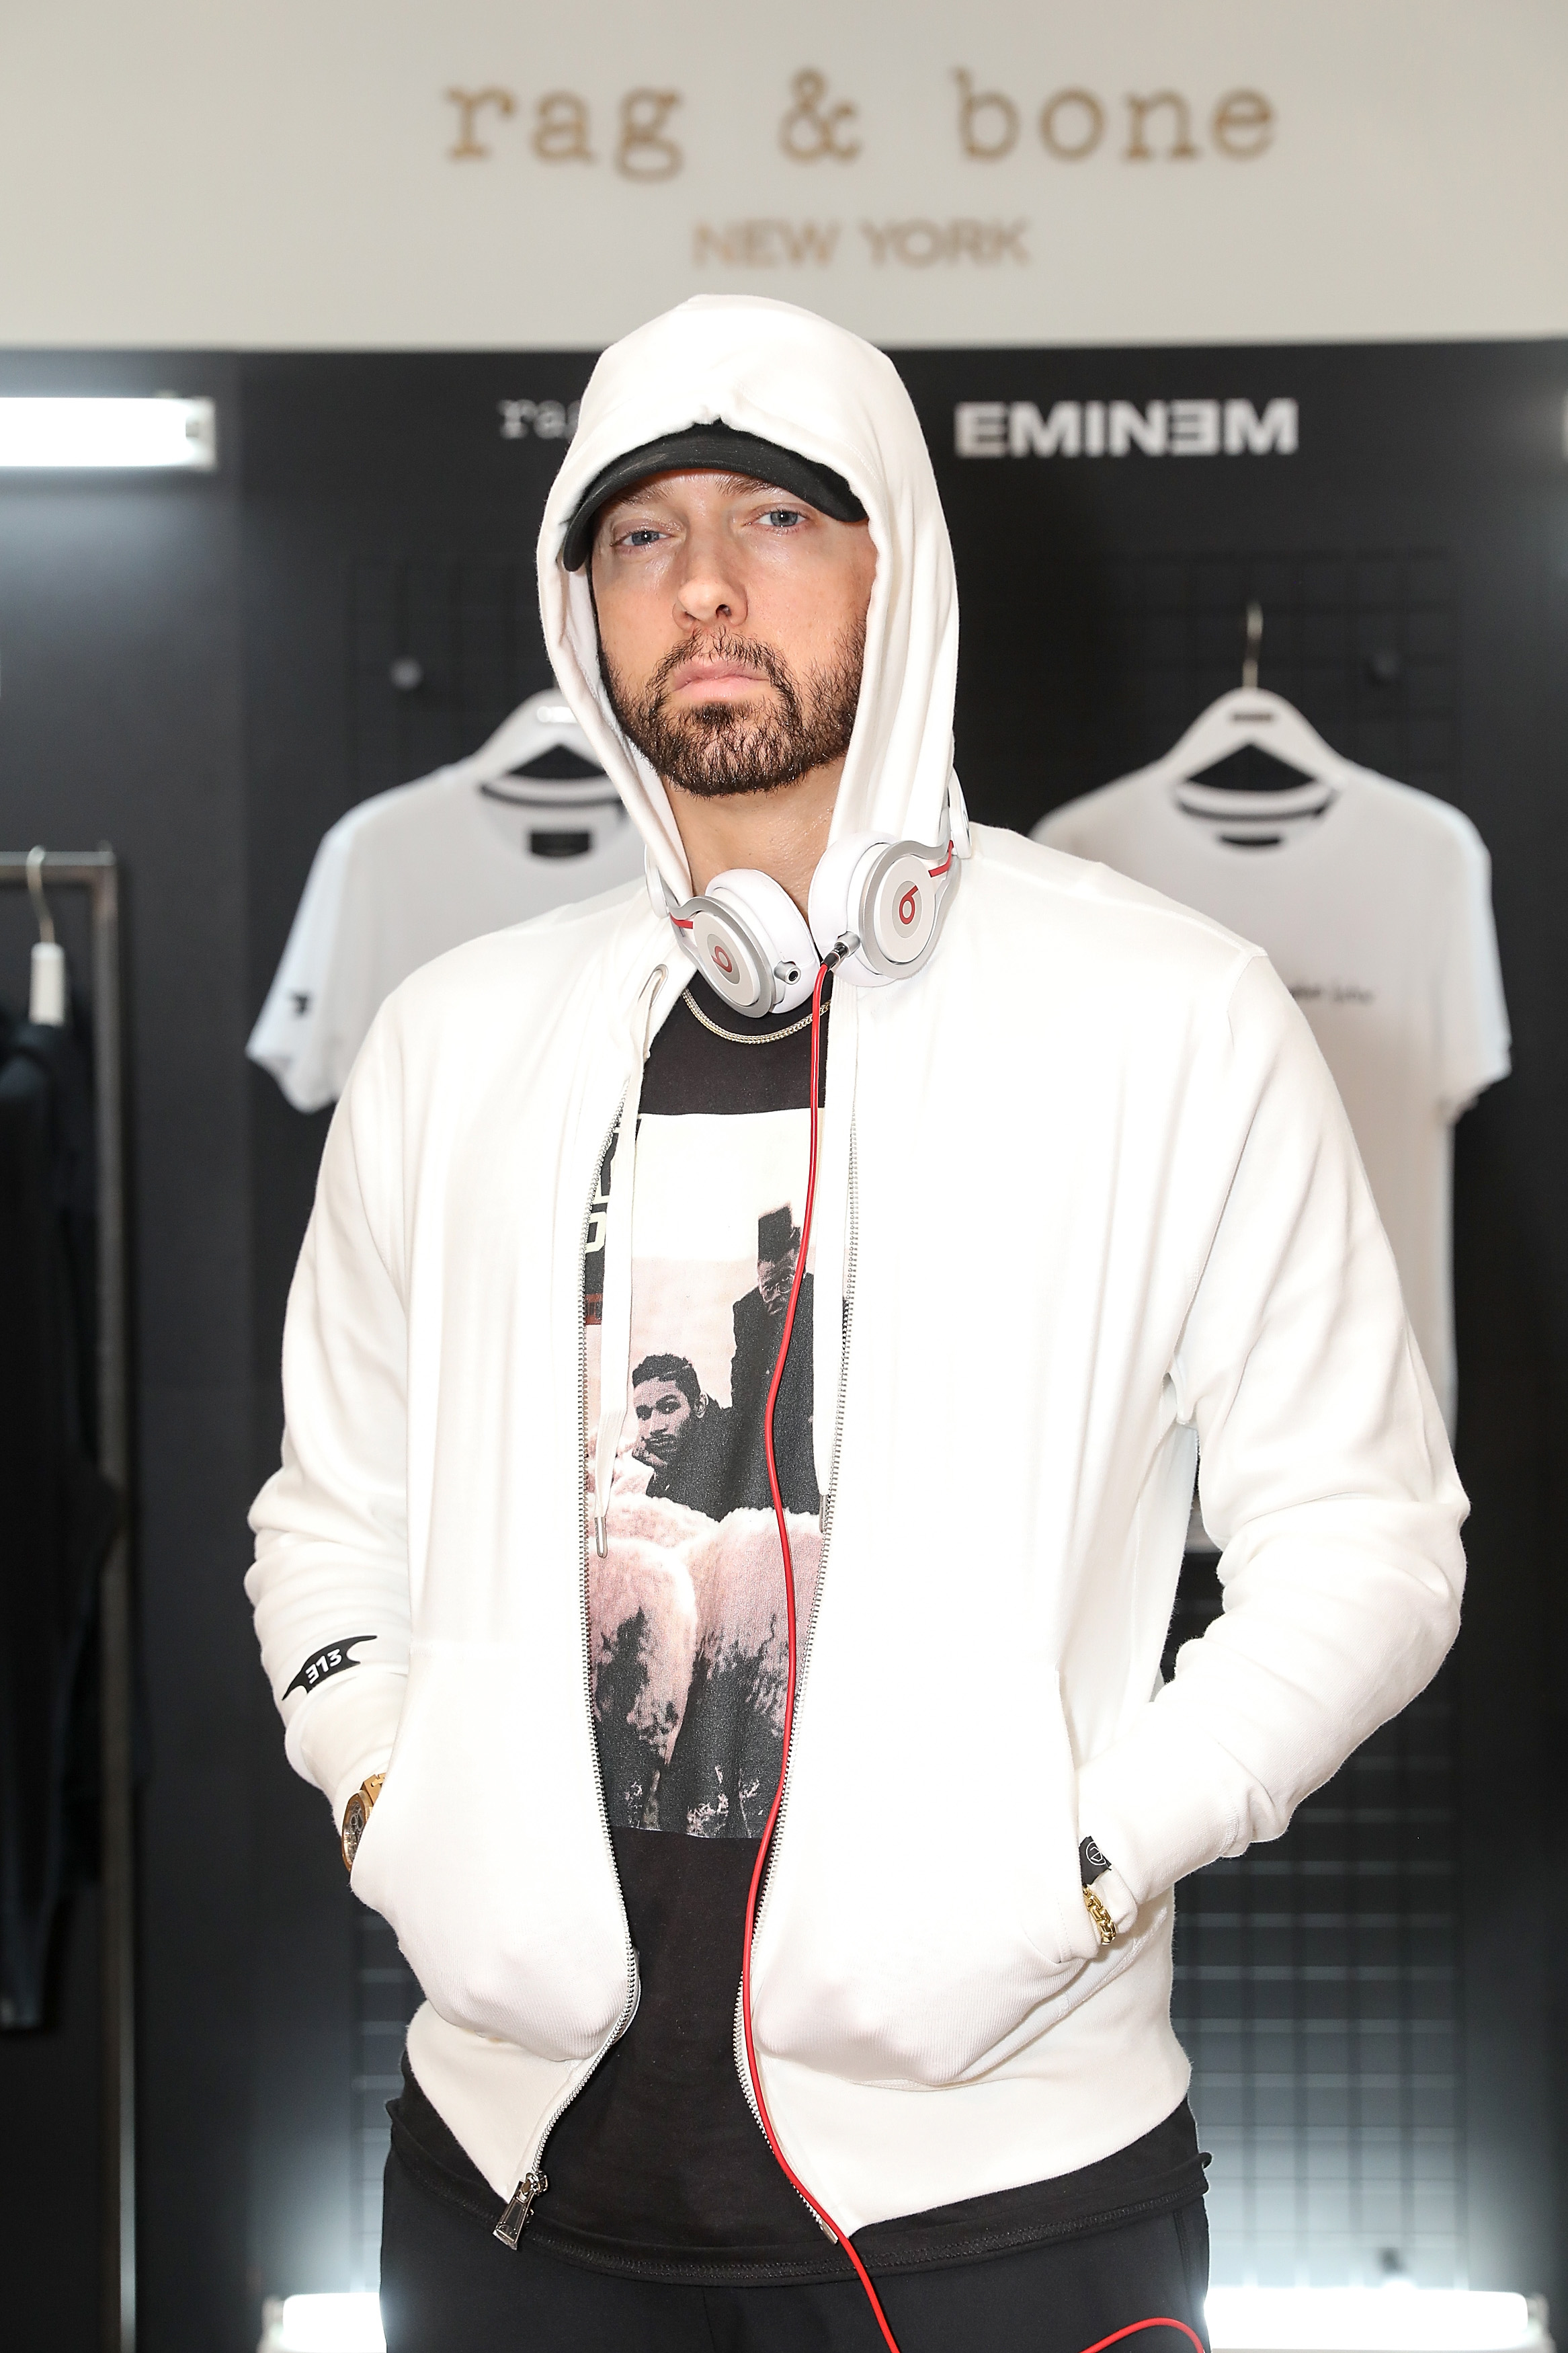 Eminem attends the rag & bone X Eminem London Pop-Up Opening on July 13, 2018 in London, England. | Source: Getty Images